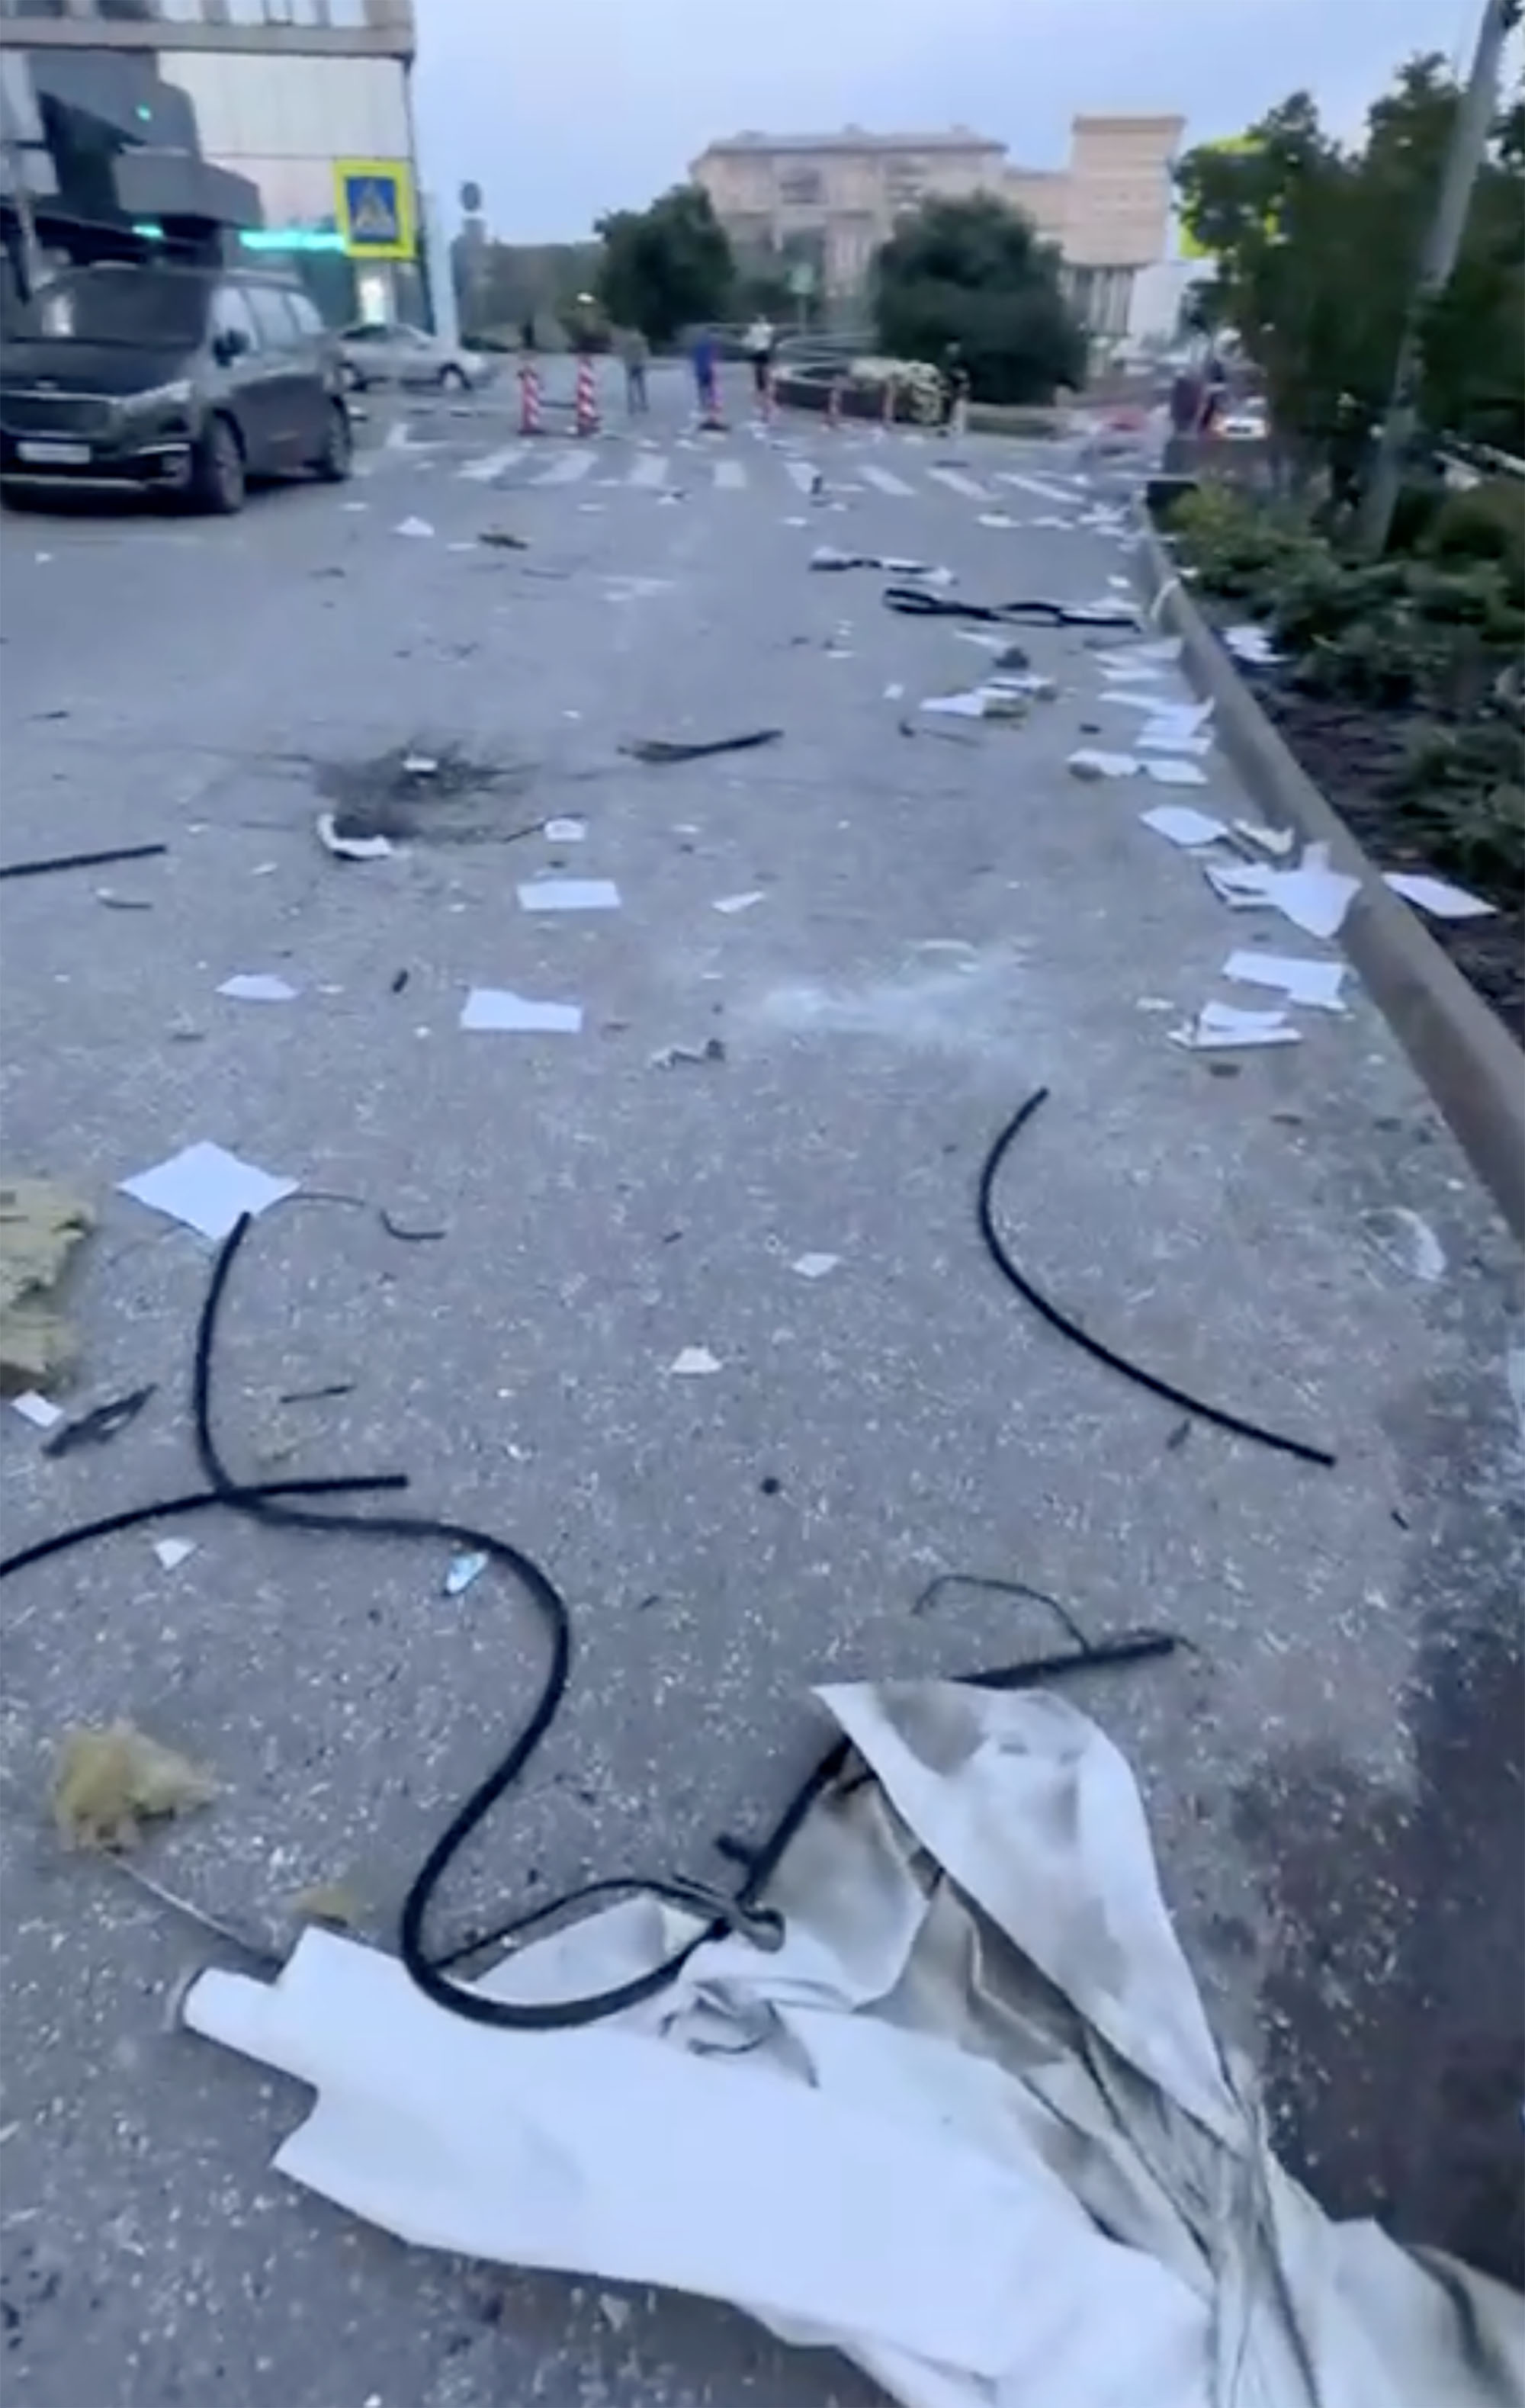 Government papers were left strewn across the streets following the drone strikes